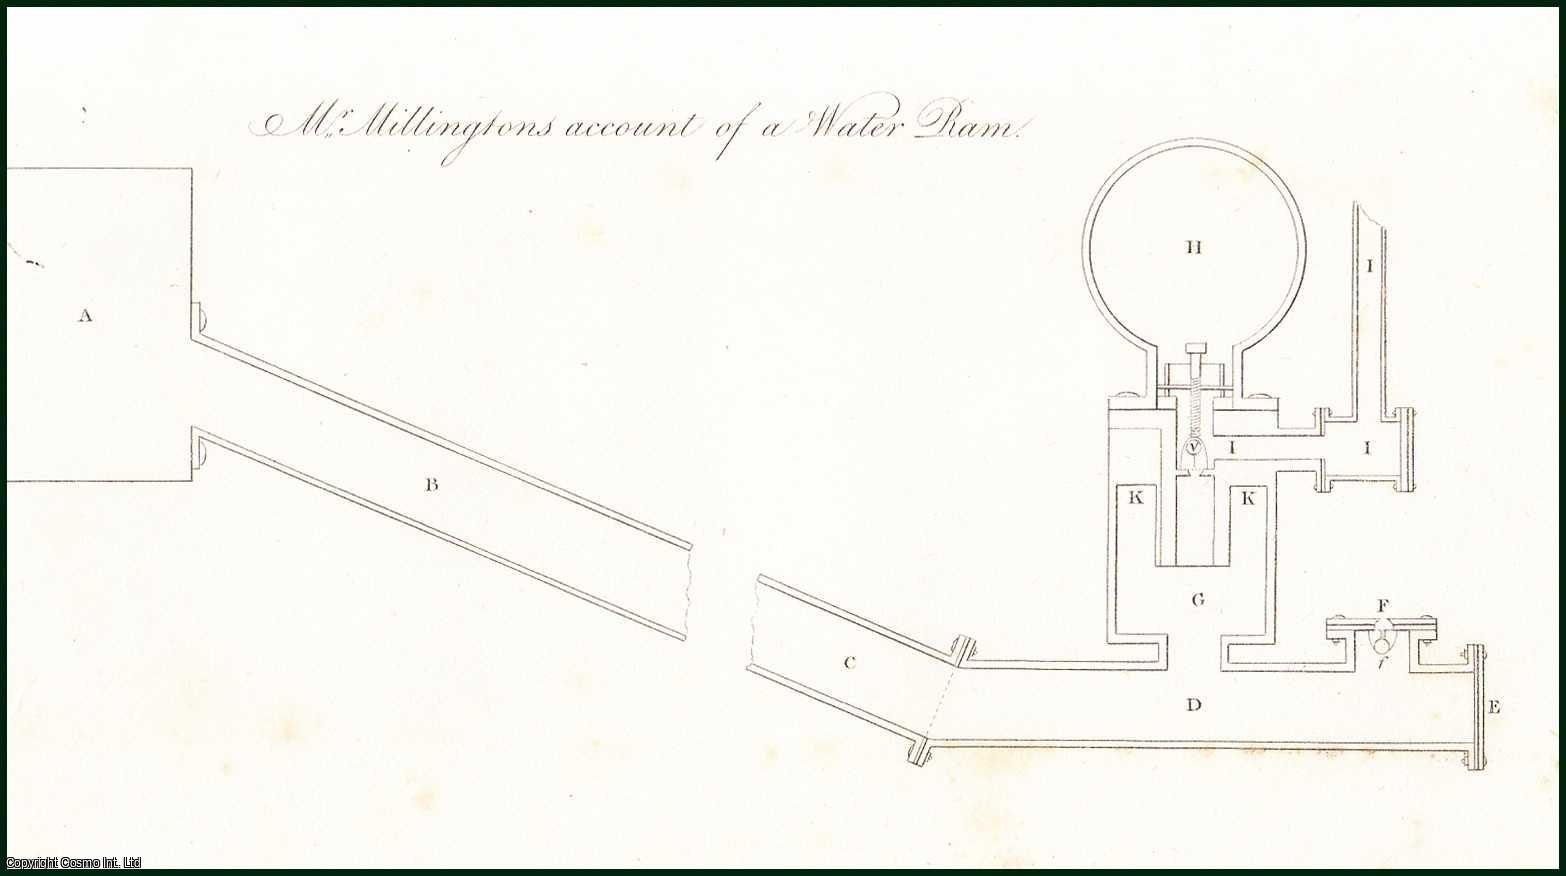 John Millington, Esq. - Account of an Hydraulic Machine for raising Water, called the Water Ram. An uncommon original article from the Journal of Science and the Arts, 1816.